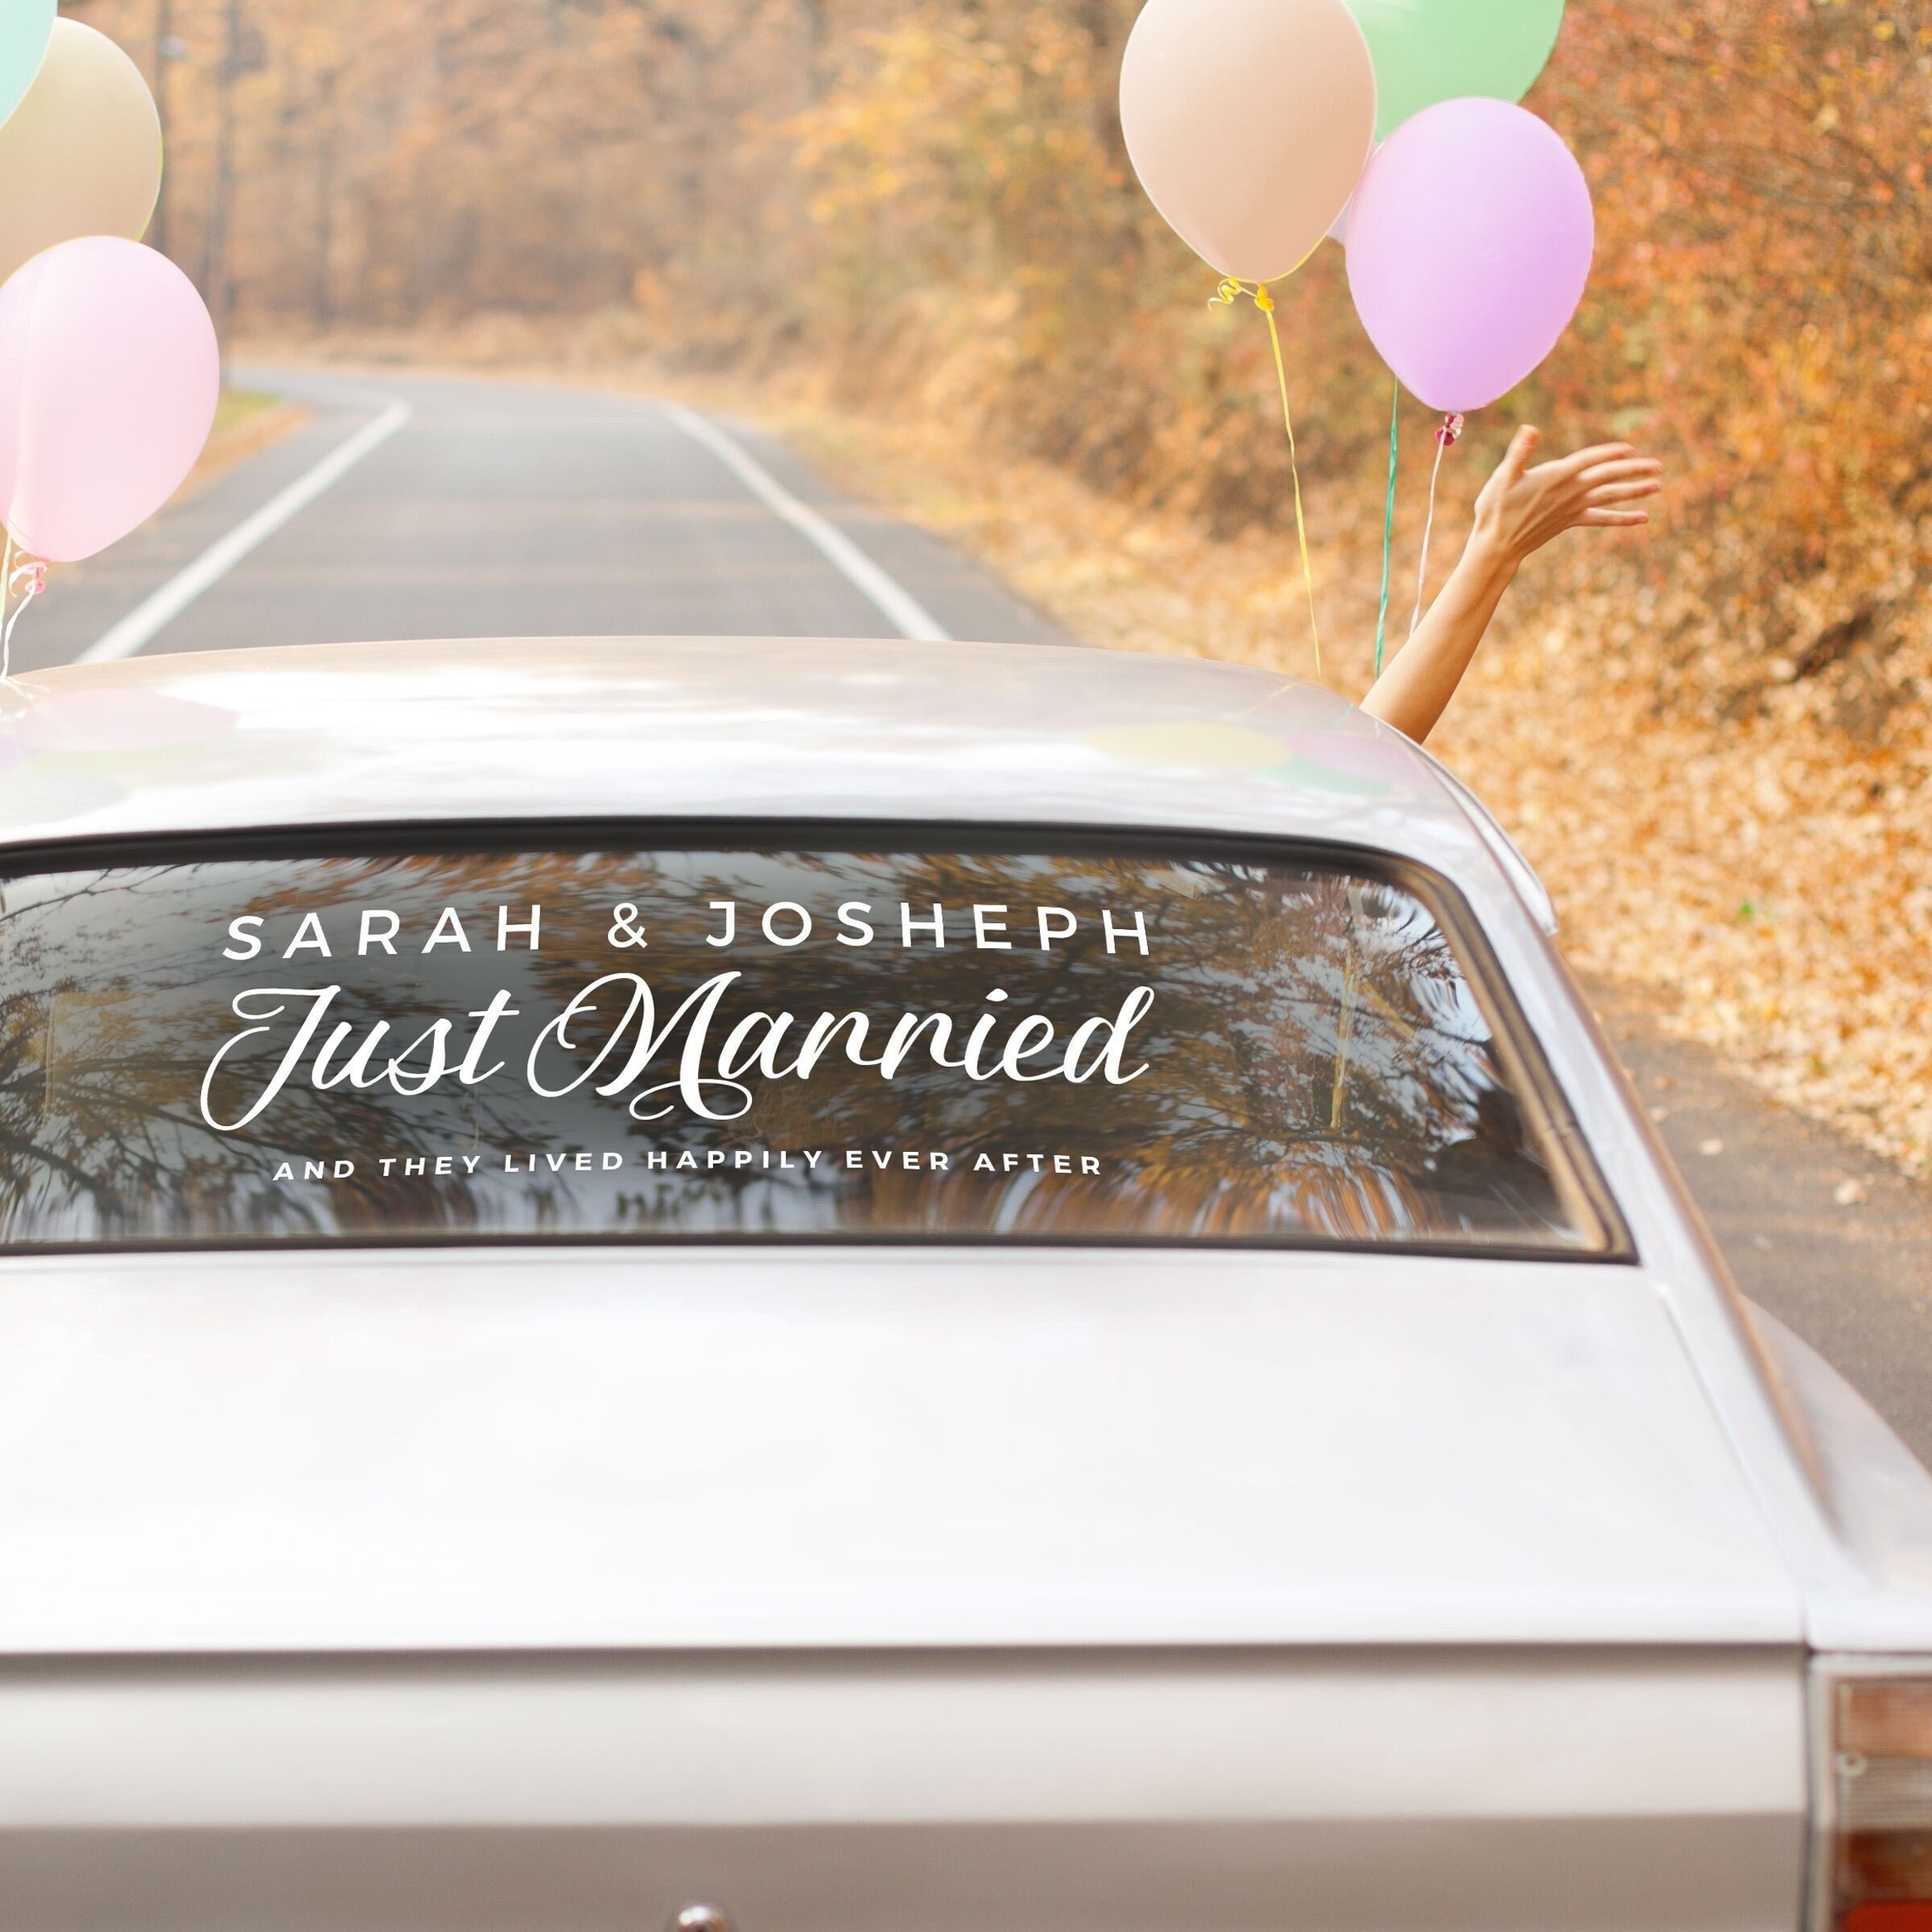 Just Married Car Sticker White Just Married Car Sticker Wedding Car Sticker  Elegant Script Wedding Car Sticker 